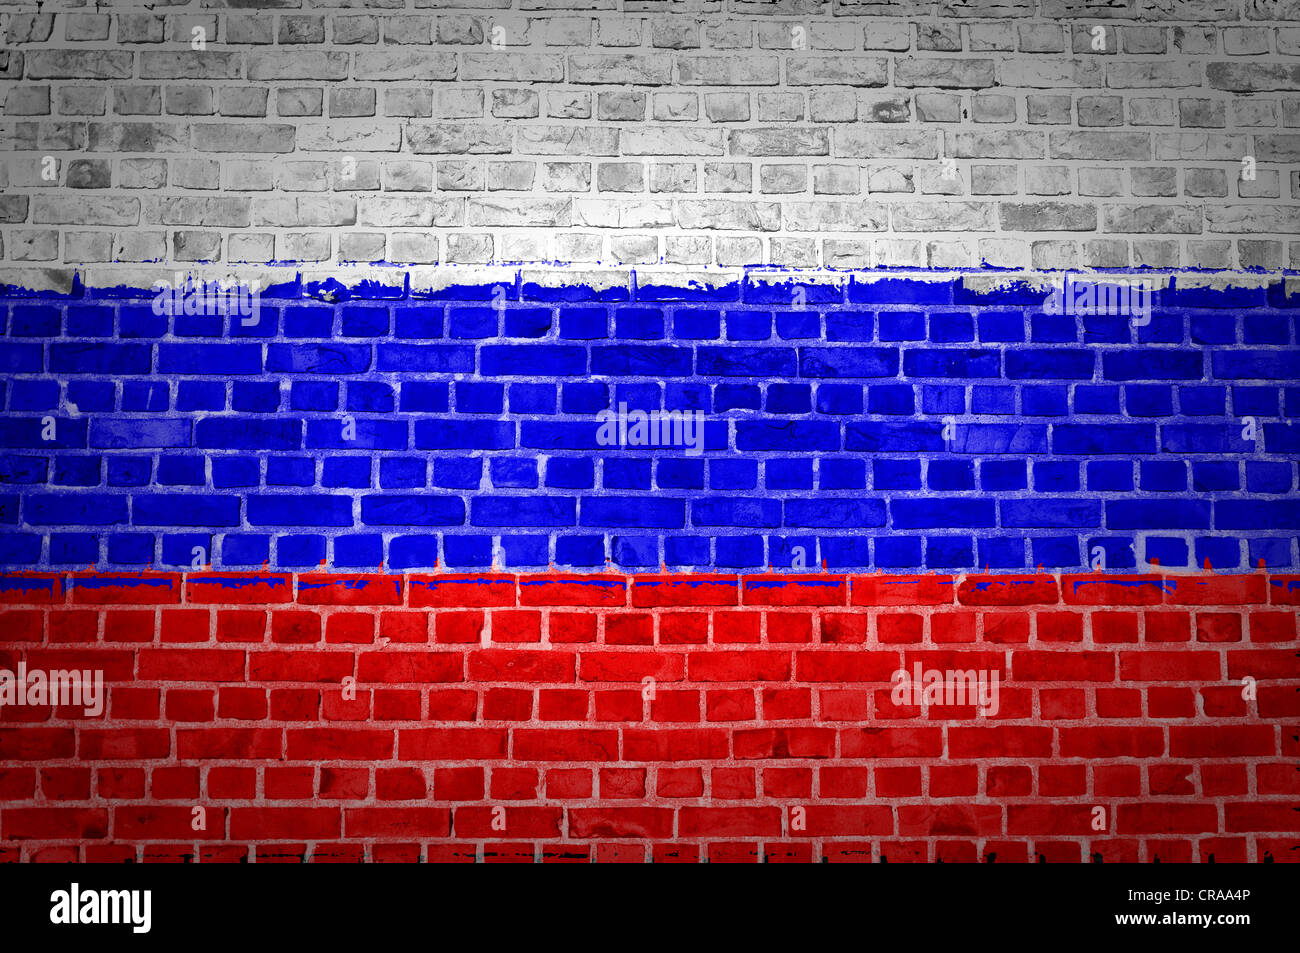 An image of the Russian Federation flag painted on a brick wall in an urban location Stock Photo